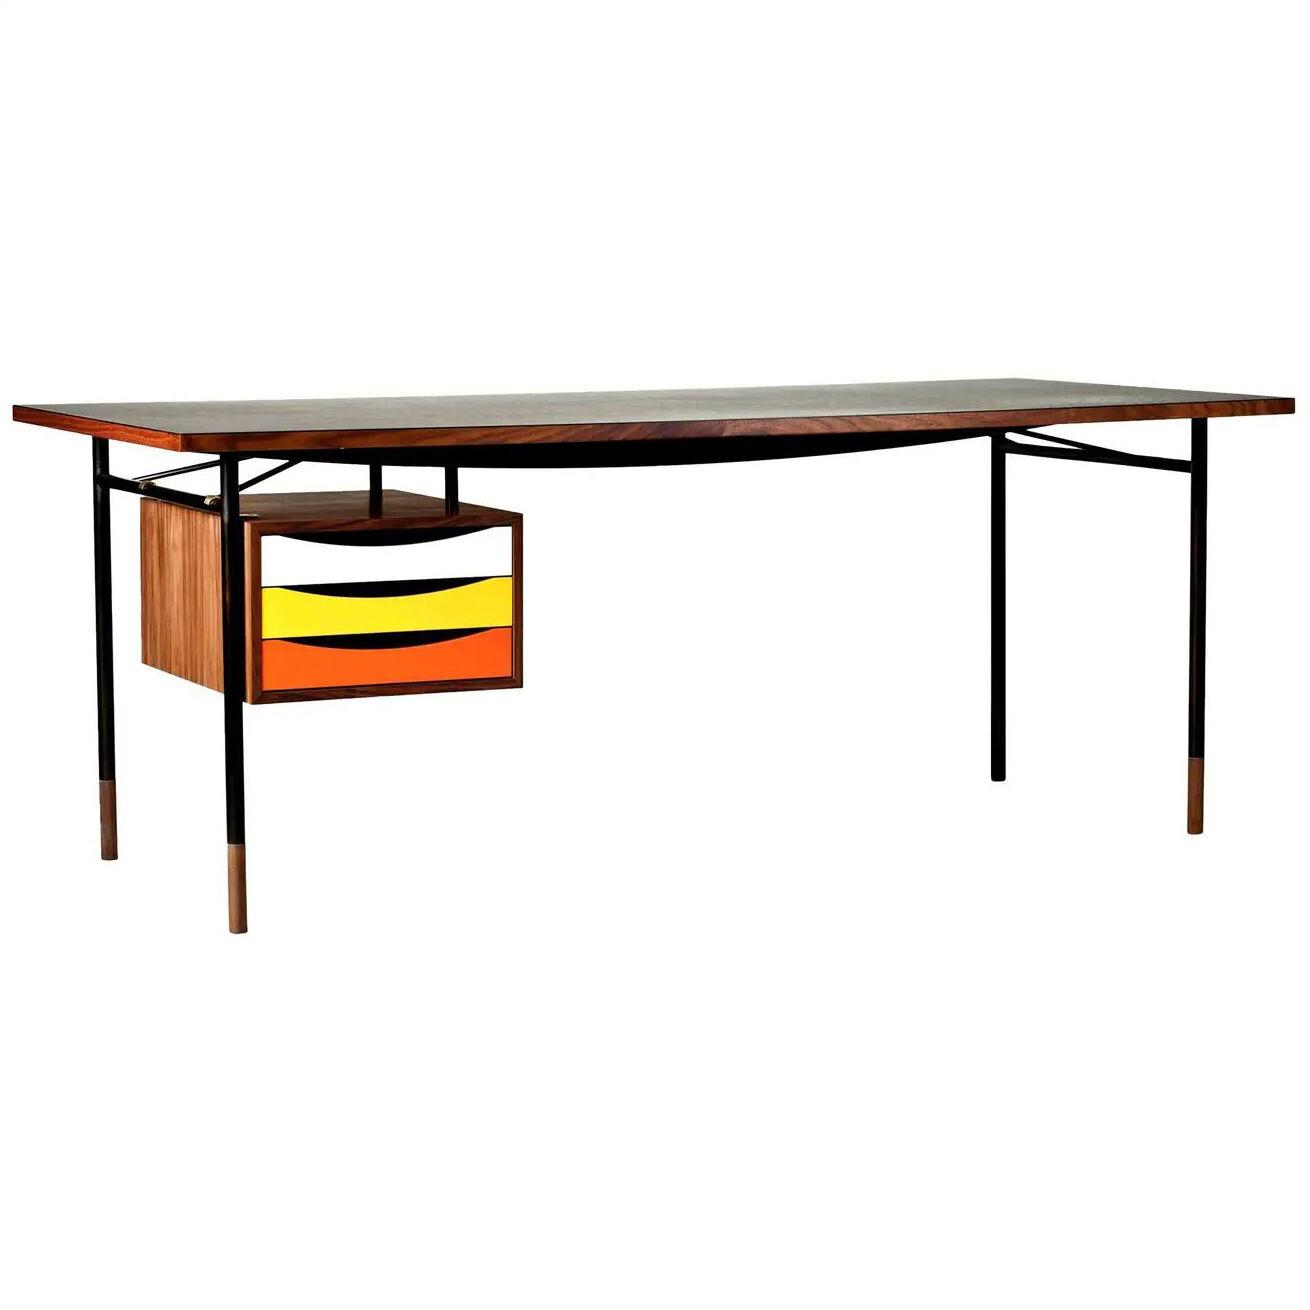 Finn Juhl Nyhavn Desk Wood and Black Lino with Tray Unit in Warm Colorway